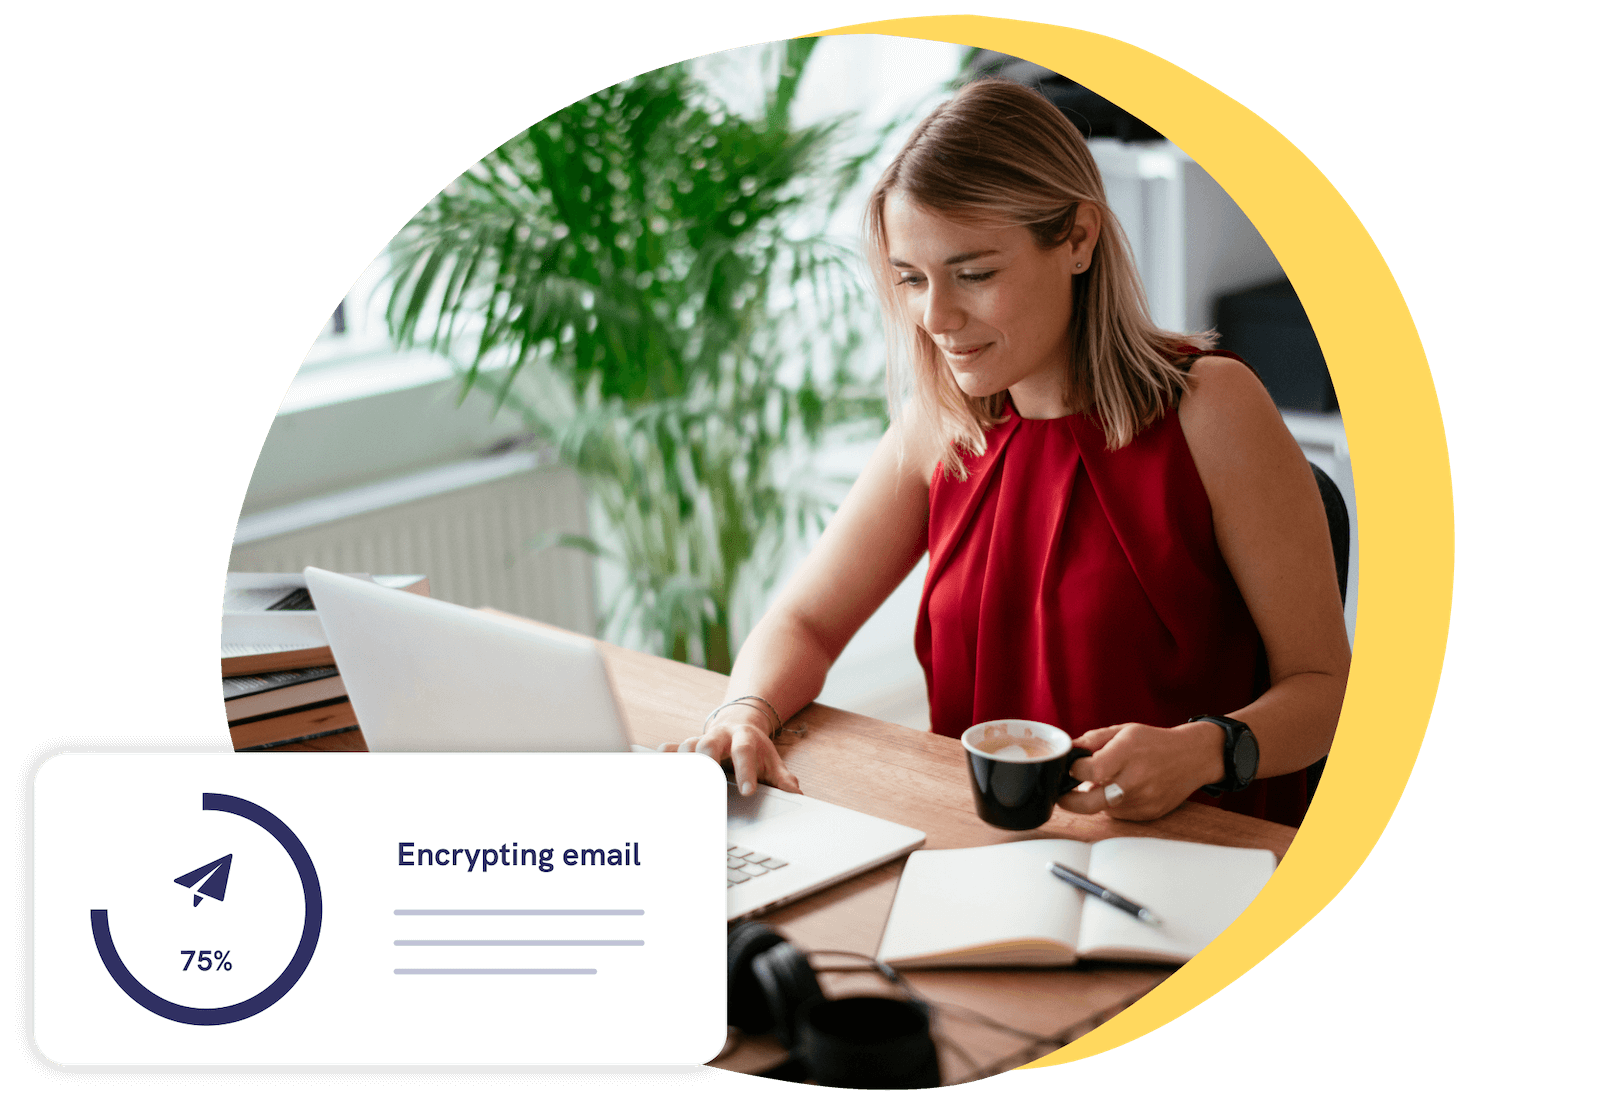 Woman encrypting emails to clients